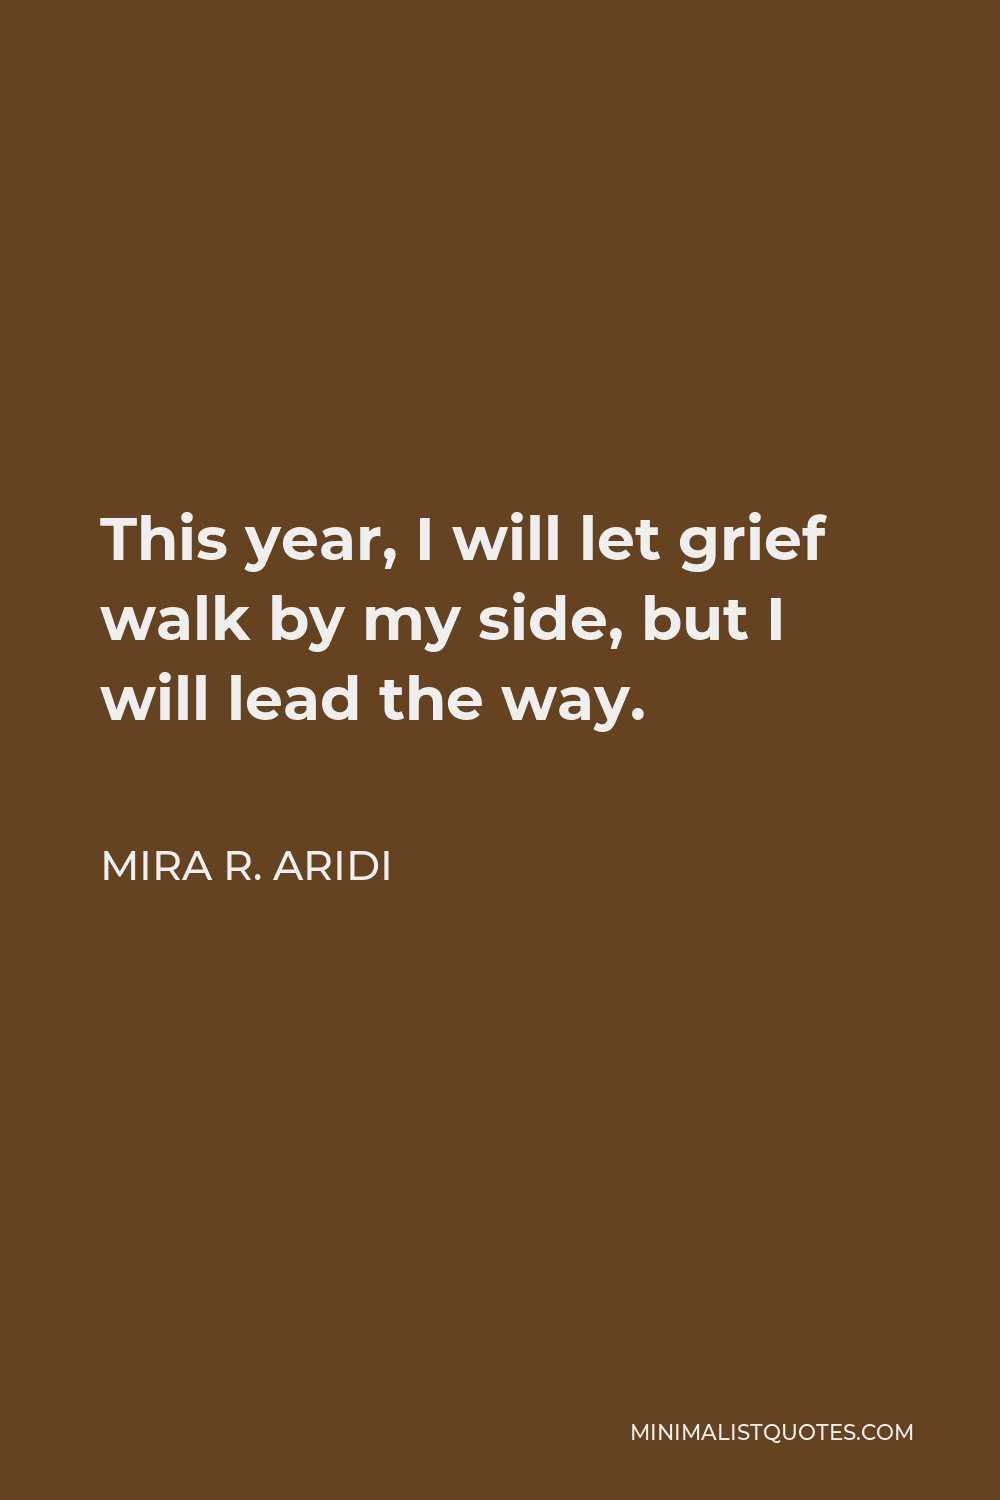 Mira R. Aridi Quote - This year, I will let grief walk by my side, but I will lead the way.